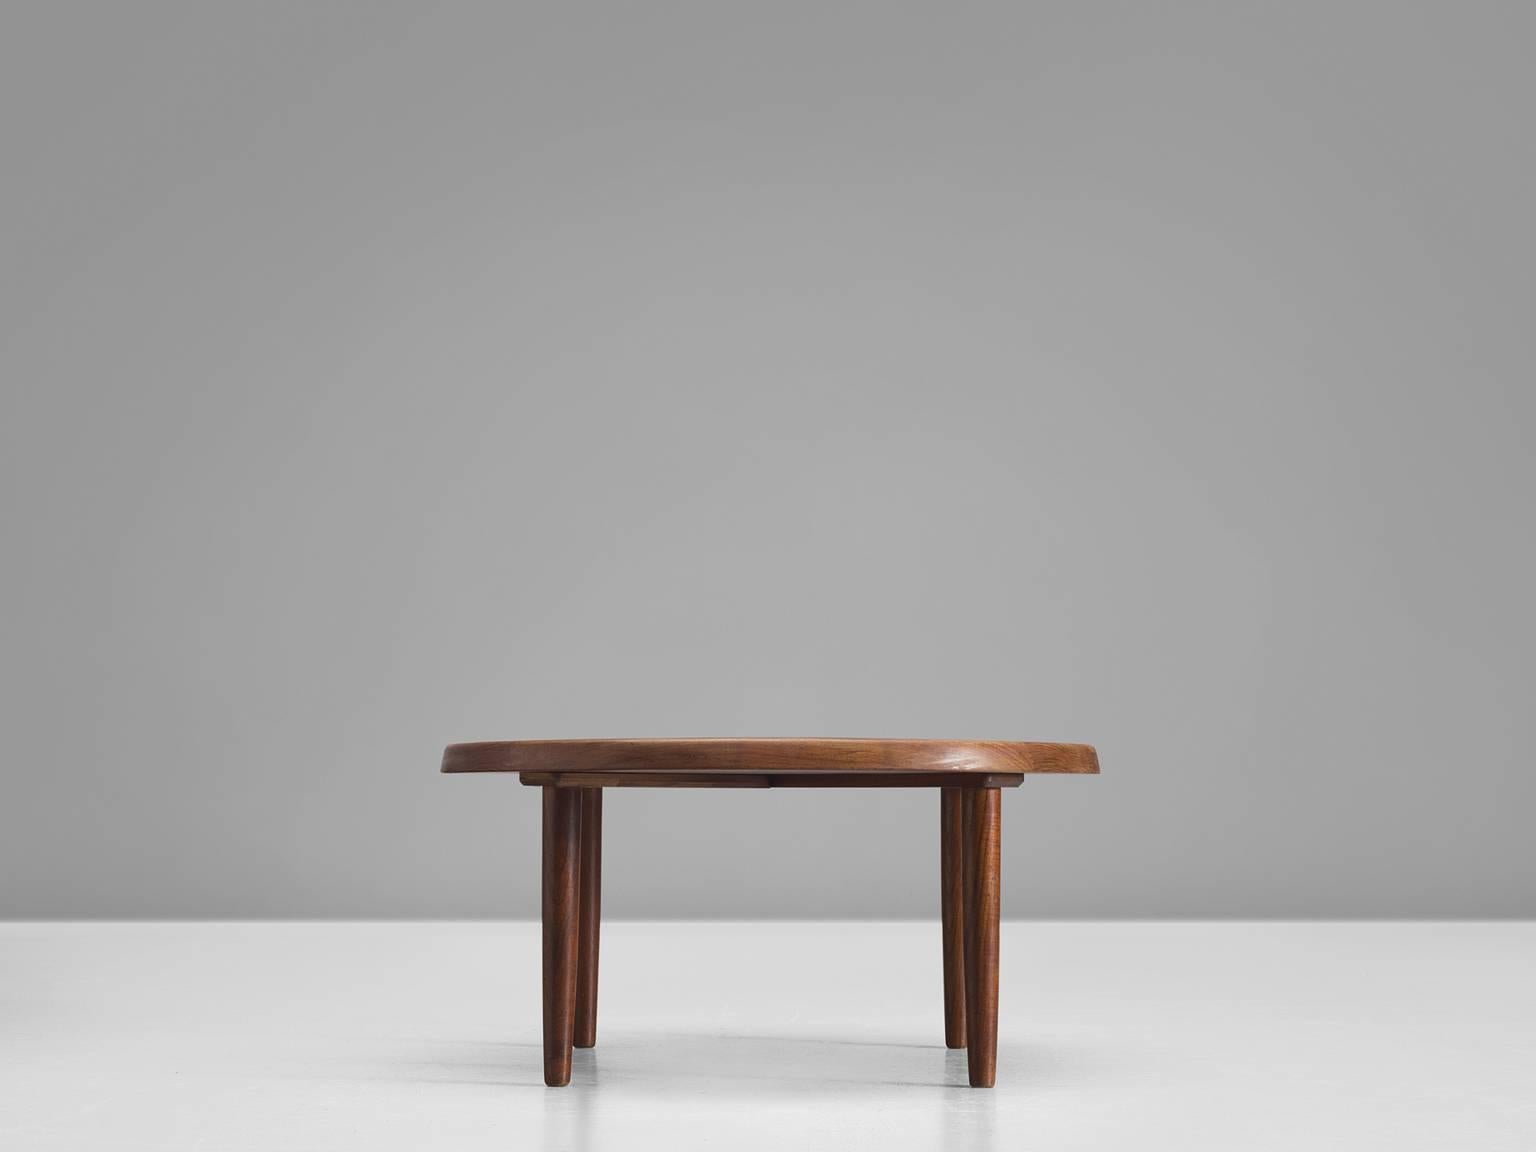 Side table, solid teak, Denmark, 1950s

This circular side table is an example of Danish design with modest aesthetics and executed in solid teak. This makes this table different from other tables that are often veneered. The top features soft edges